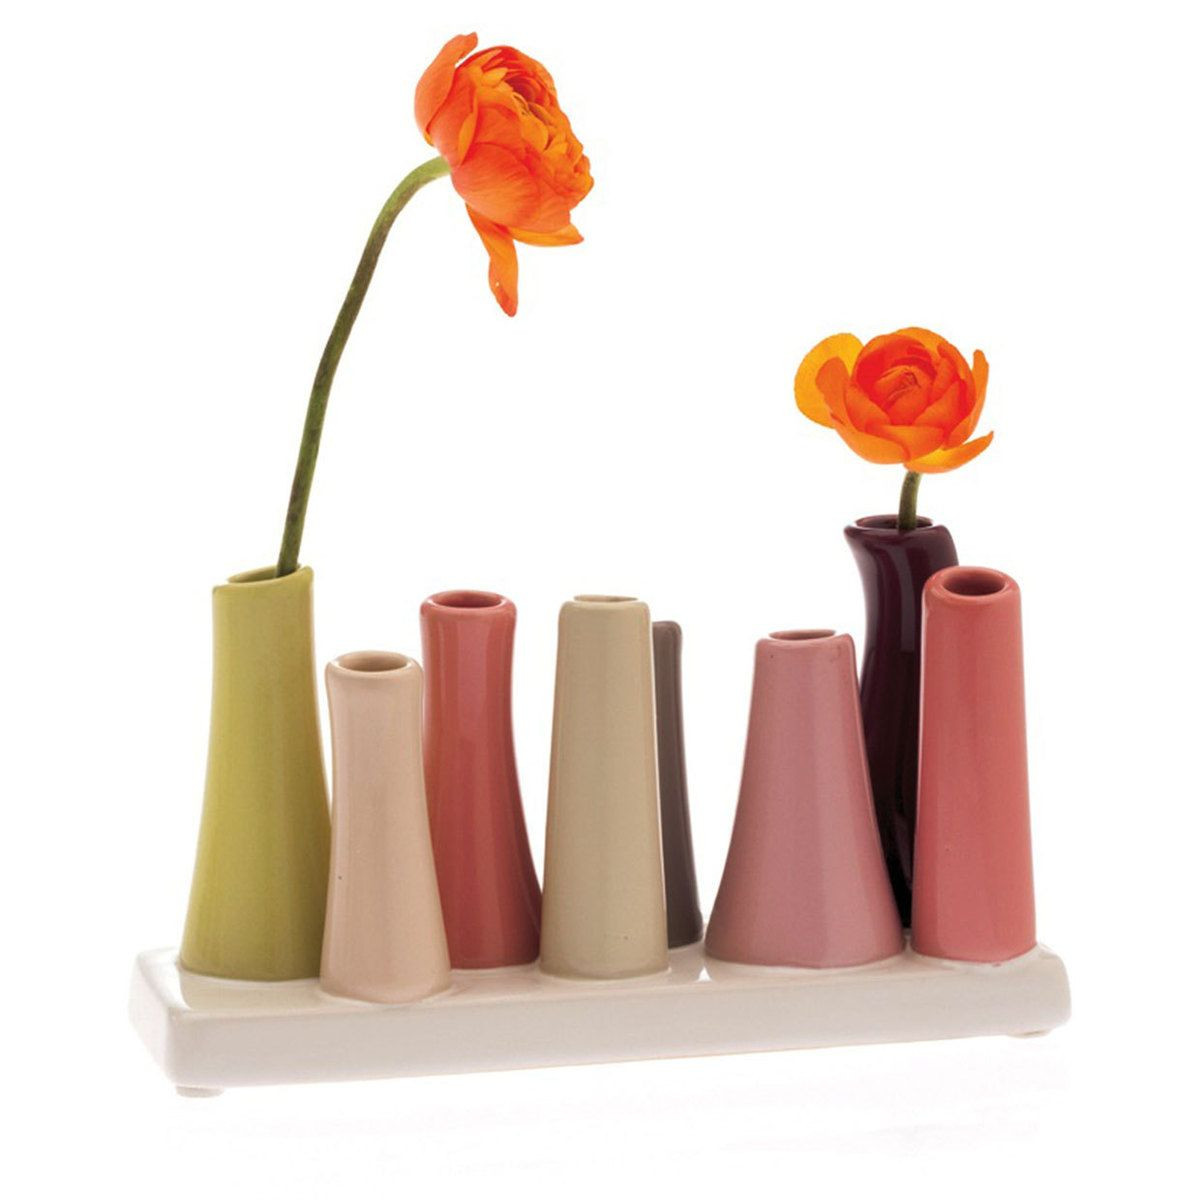 24 Best Plant Rooter Vase 2024 free download plant rooter vase of fab com pooley 8 tube vase classic super cute love the color for fab com pooley 8 tube vase classic super cute love the color